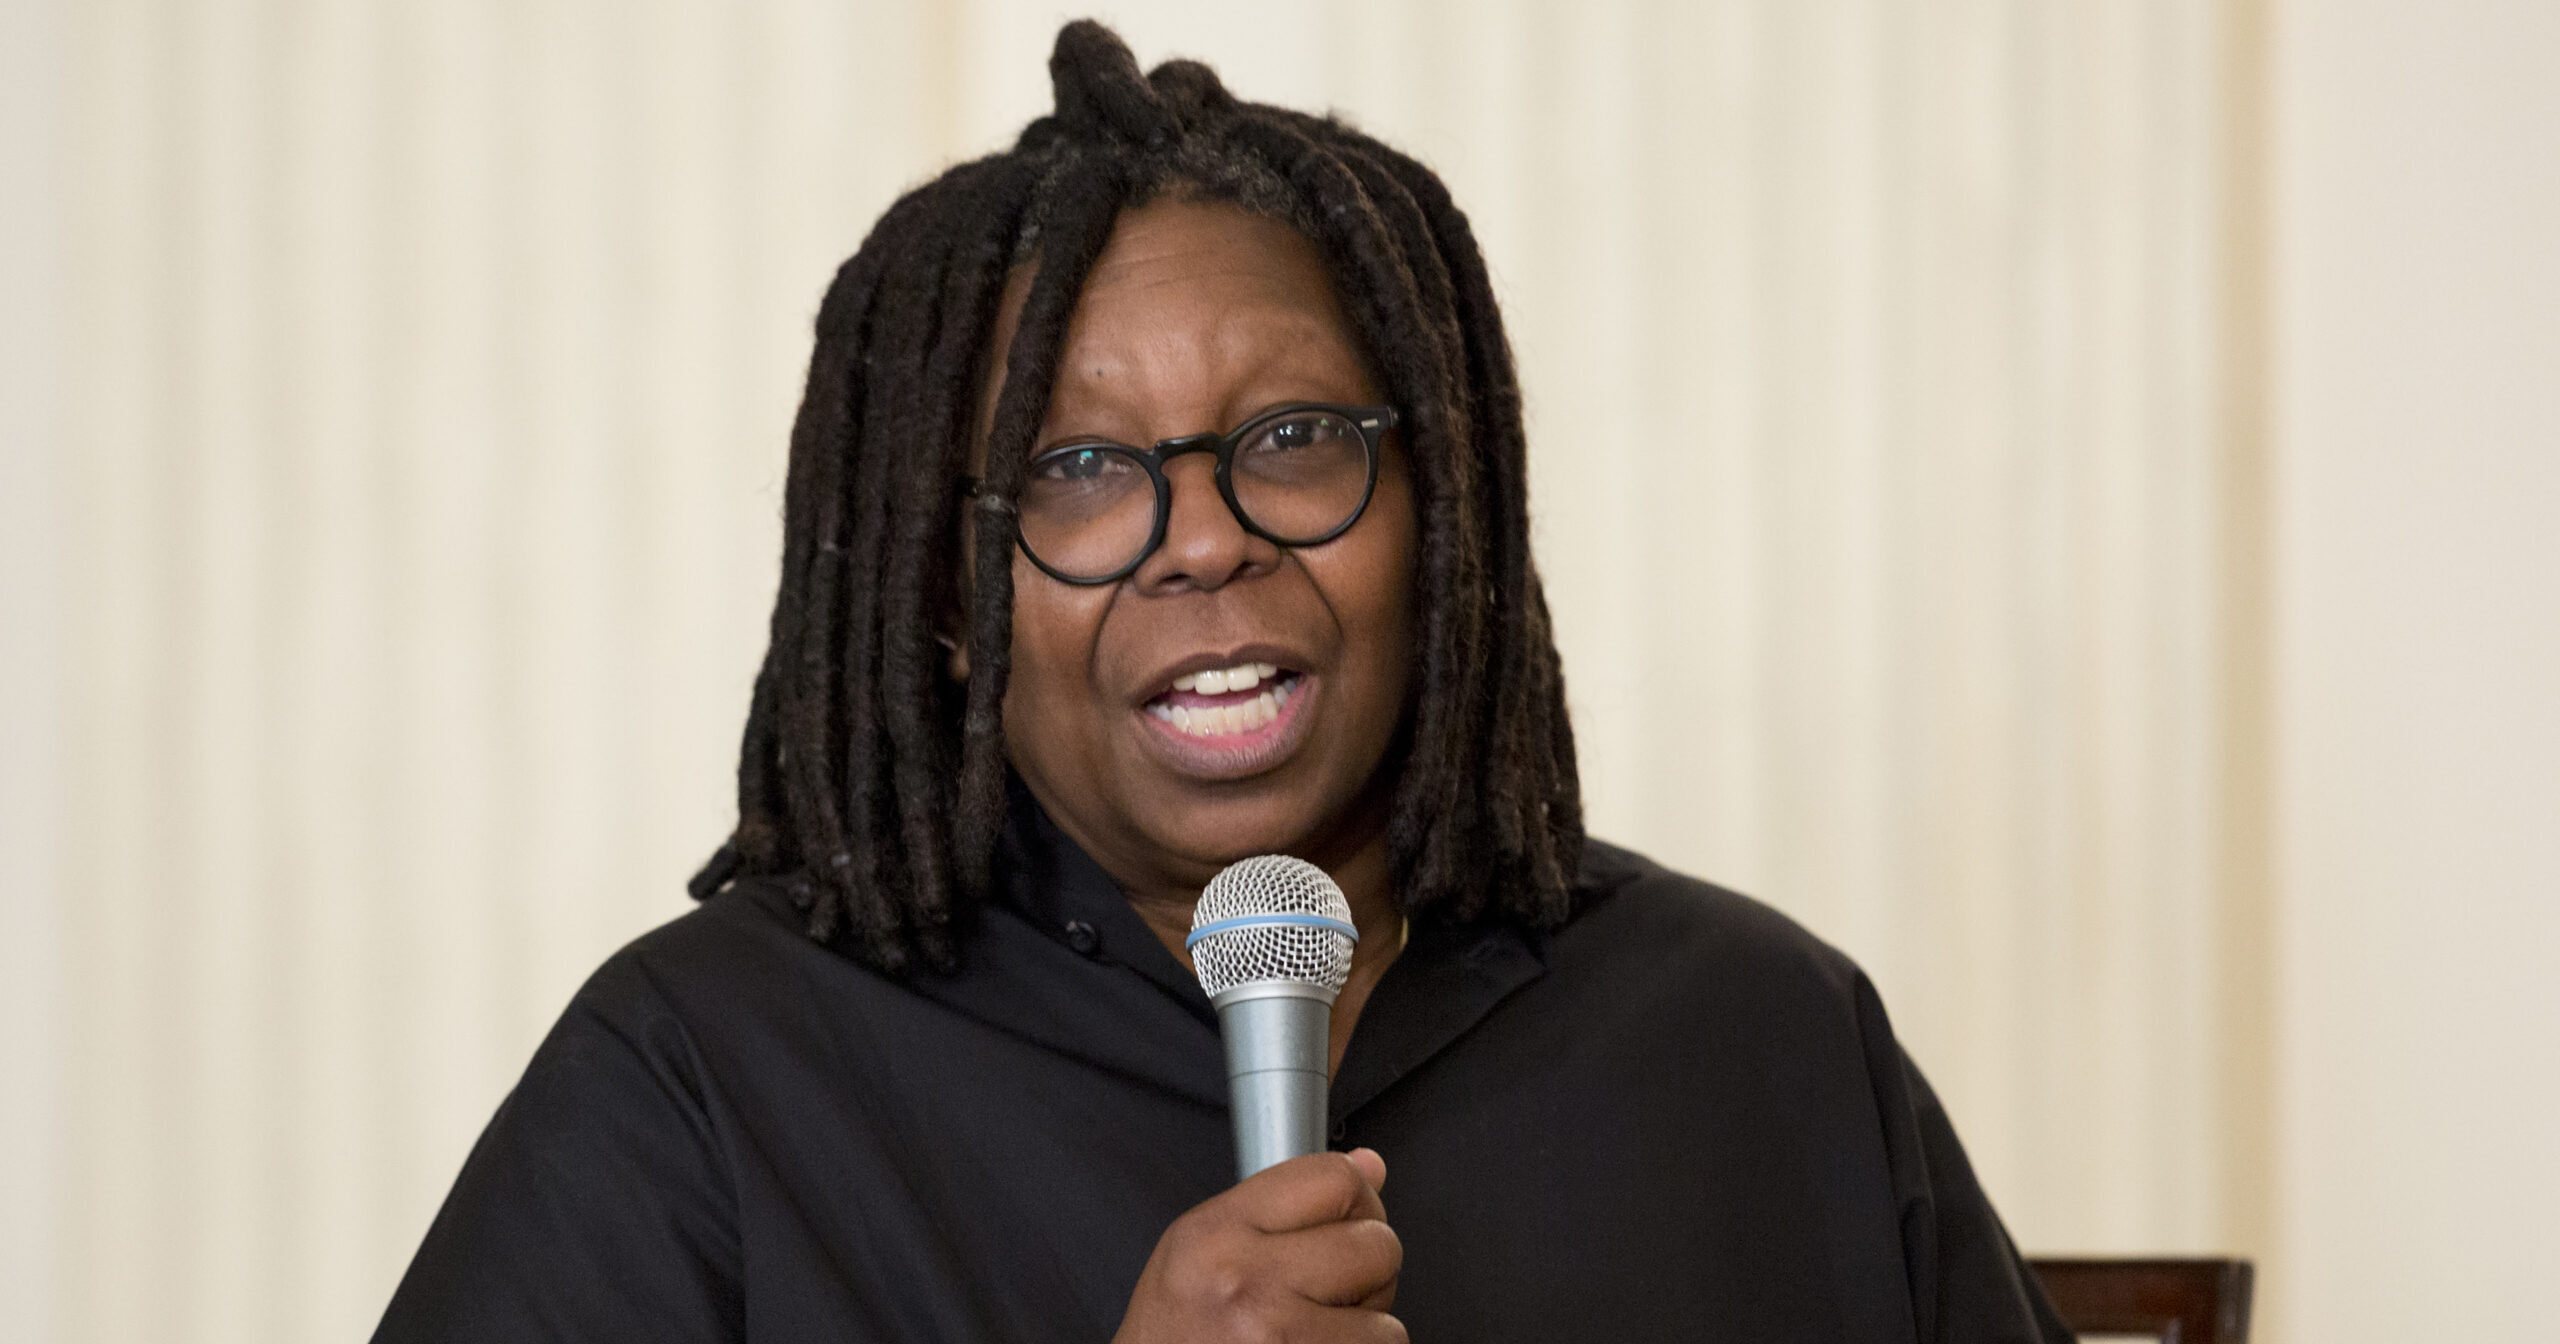 FILE - Whoopi Goldberg speaks during the Broadway at the White House event in the State Dining Room of the White House in Washington, Monday, Nov. 16, 2015. Goldberg has apologized in a tweet Monday, Jan. 31, 2022, for saying the Holocaust was not about race. Her initial comments Monday morning on ABC’s ‘’The View" caused a backlash. (AP Photo/Carolyn Kaster, File)